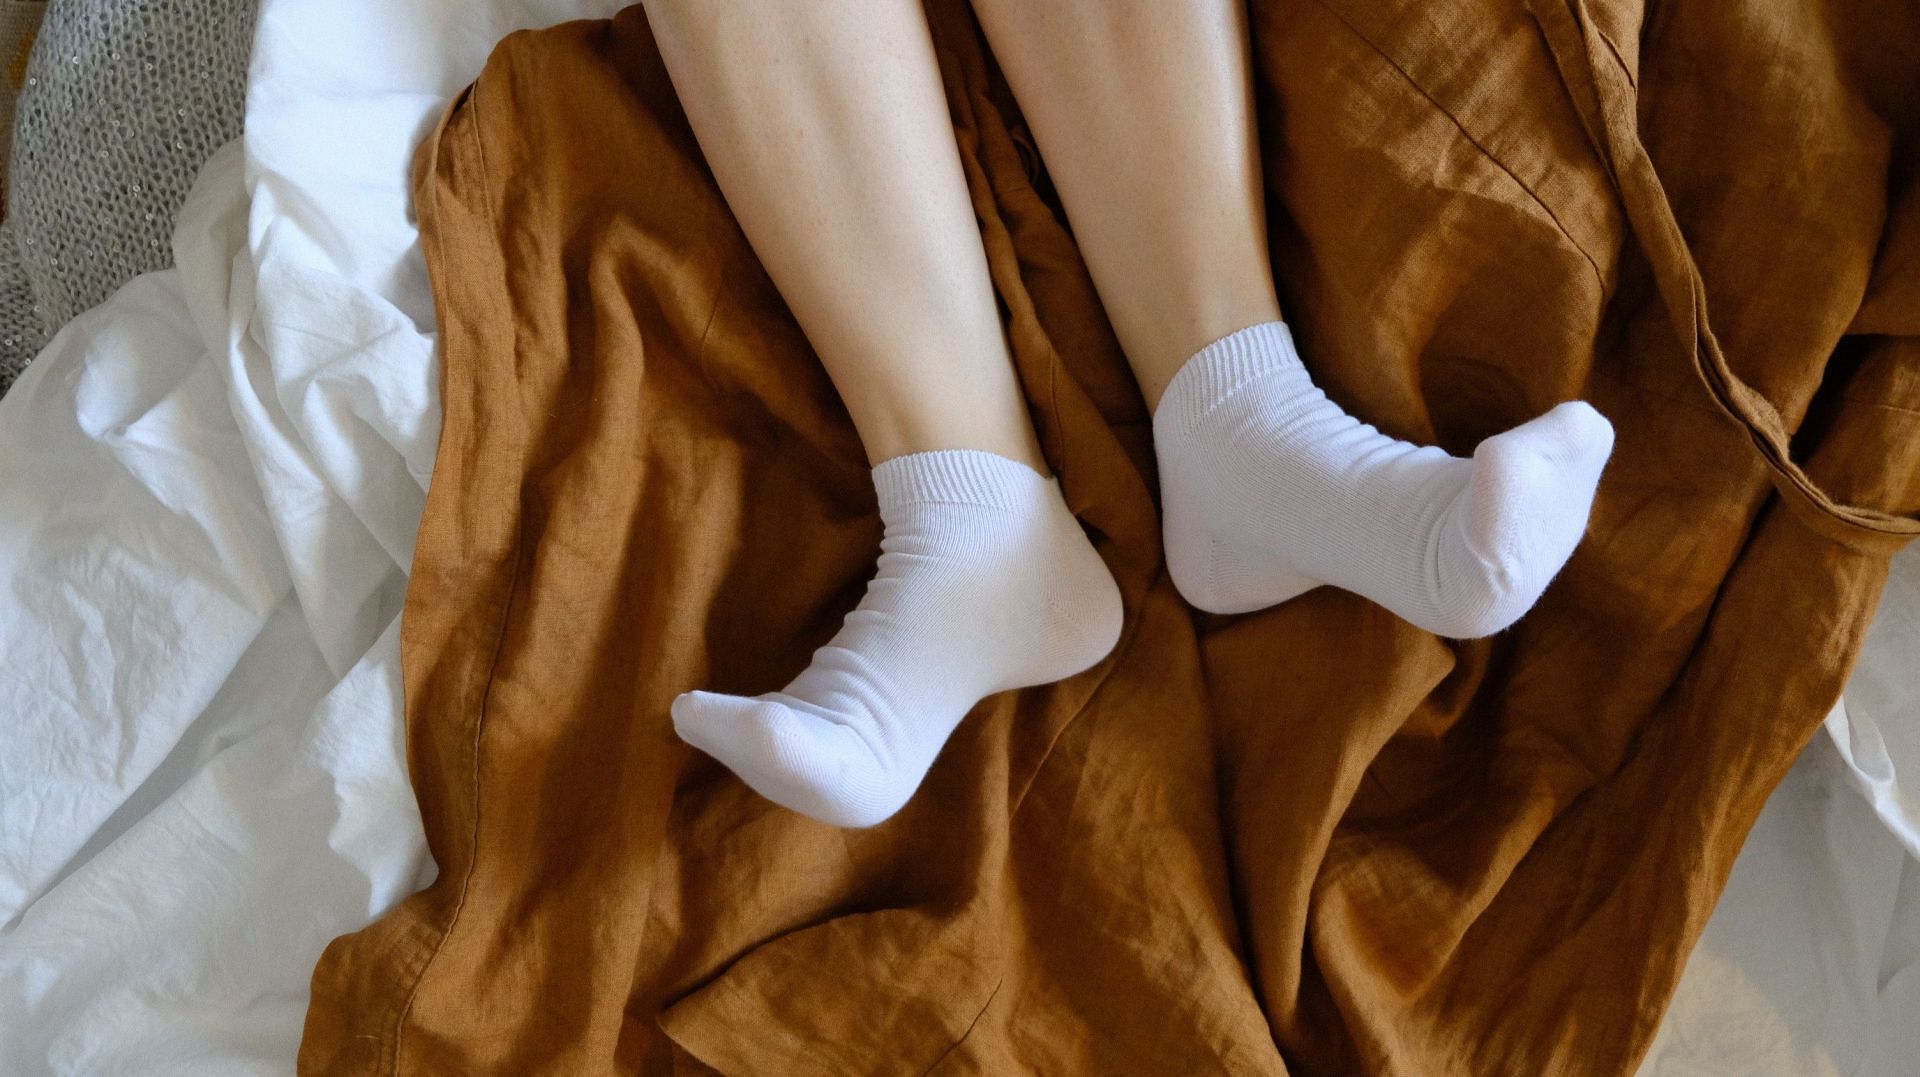 If you have Restless Leg Syndrome, this piece is for you. (Image via pexels/Livi Po)